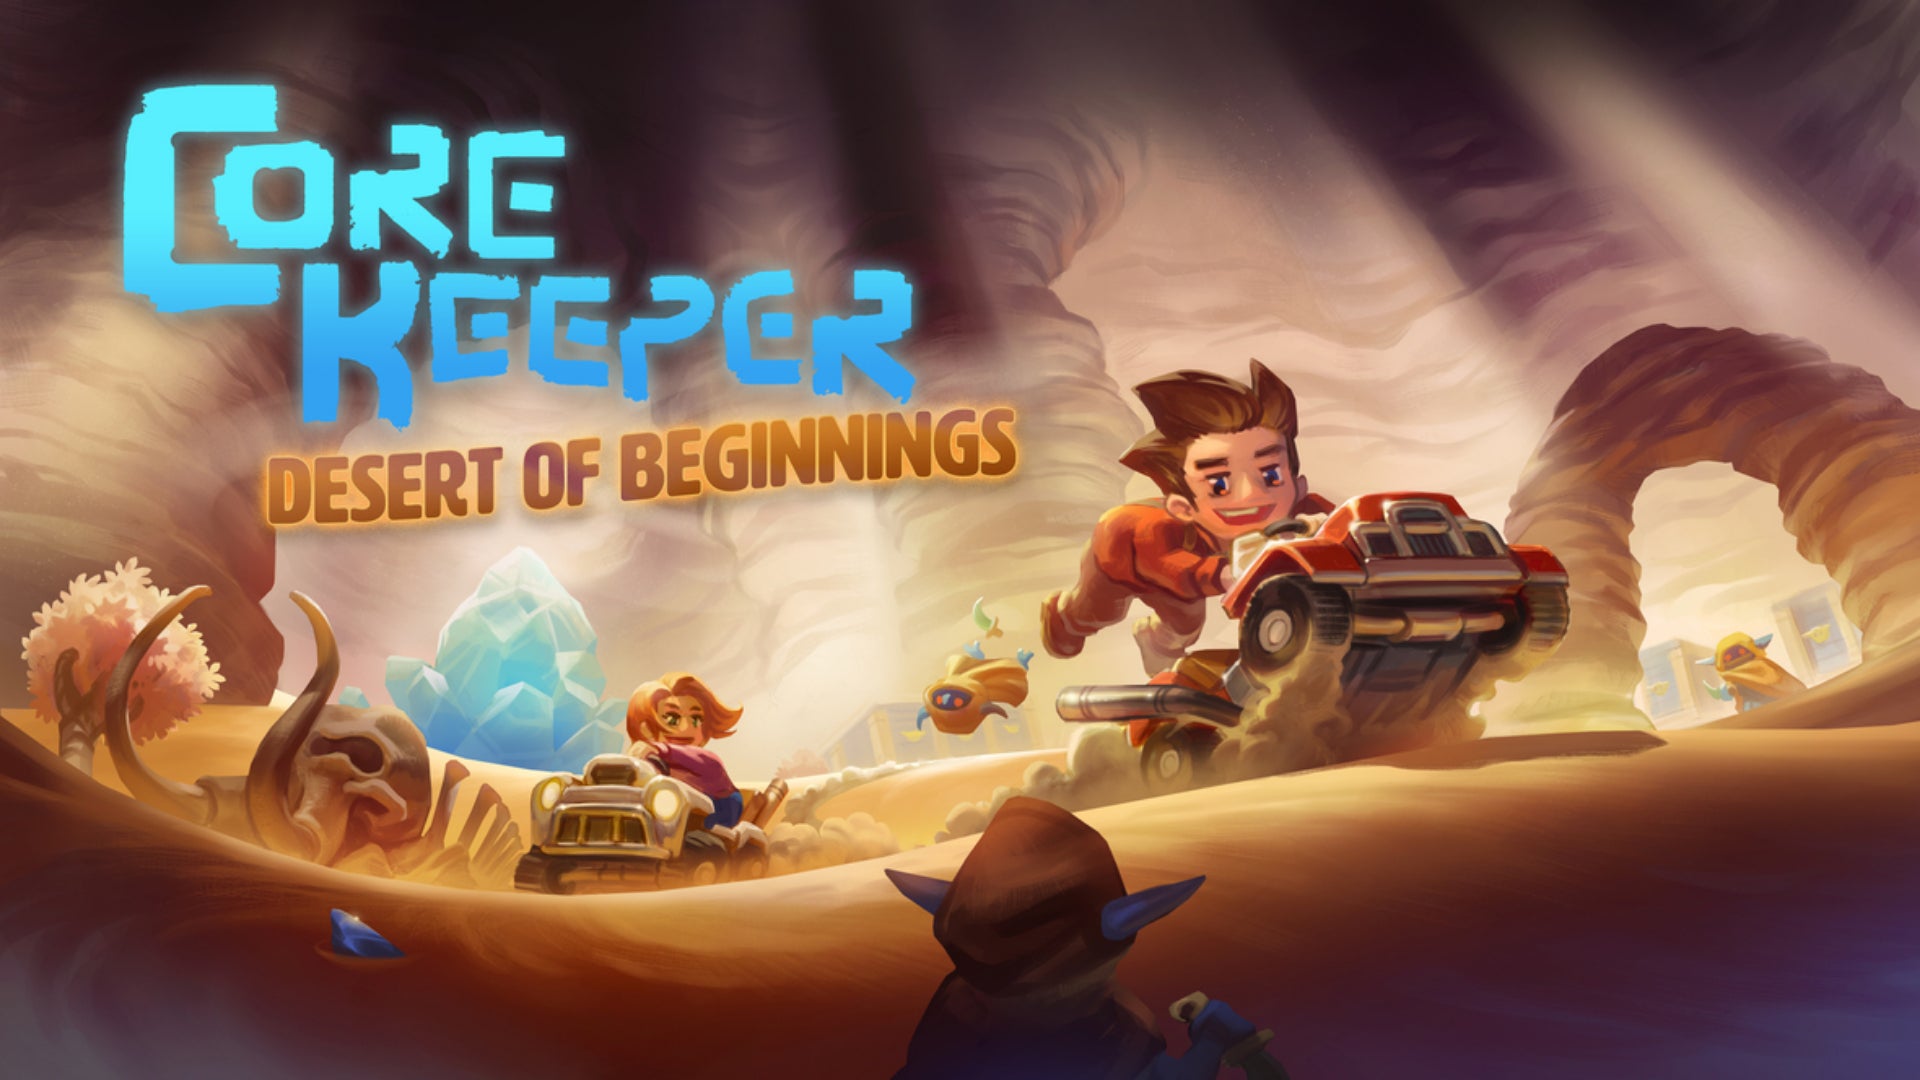 Core Keeper’s next update, The Desert of Beginnings, introduces karting and bug hunting